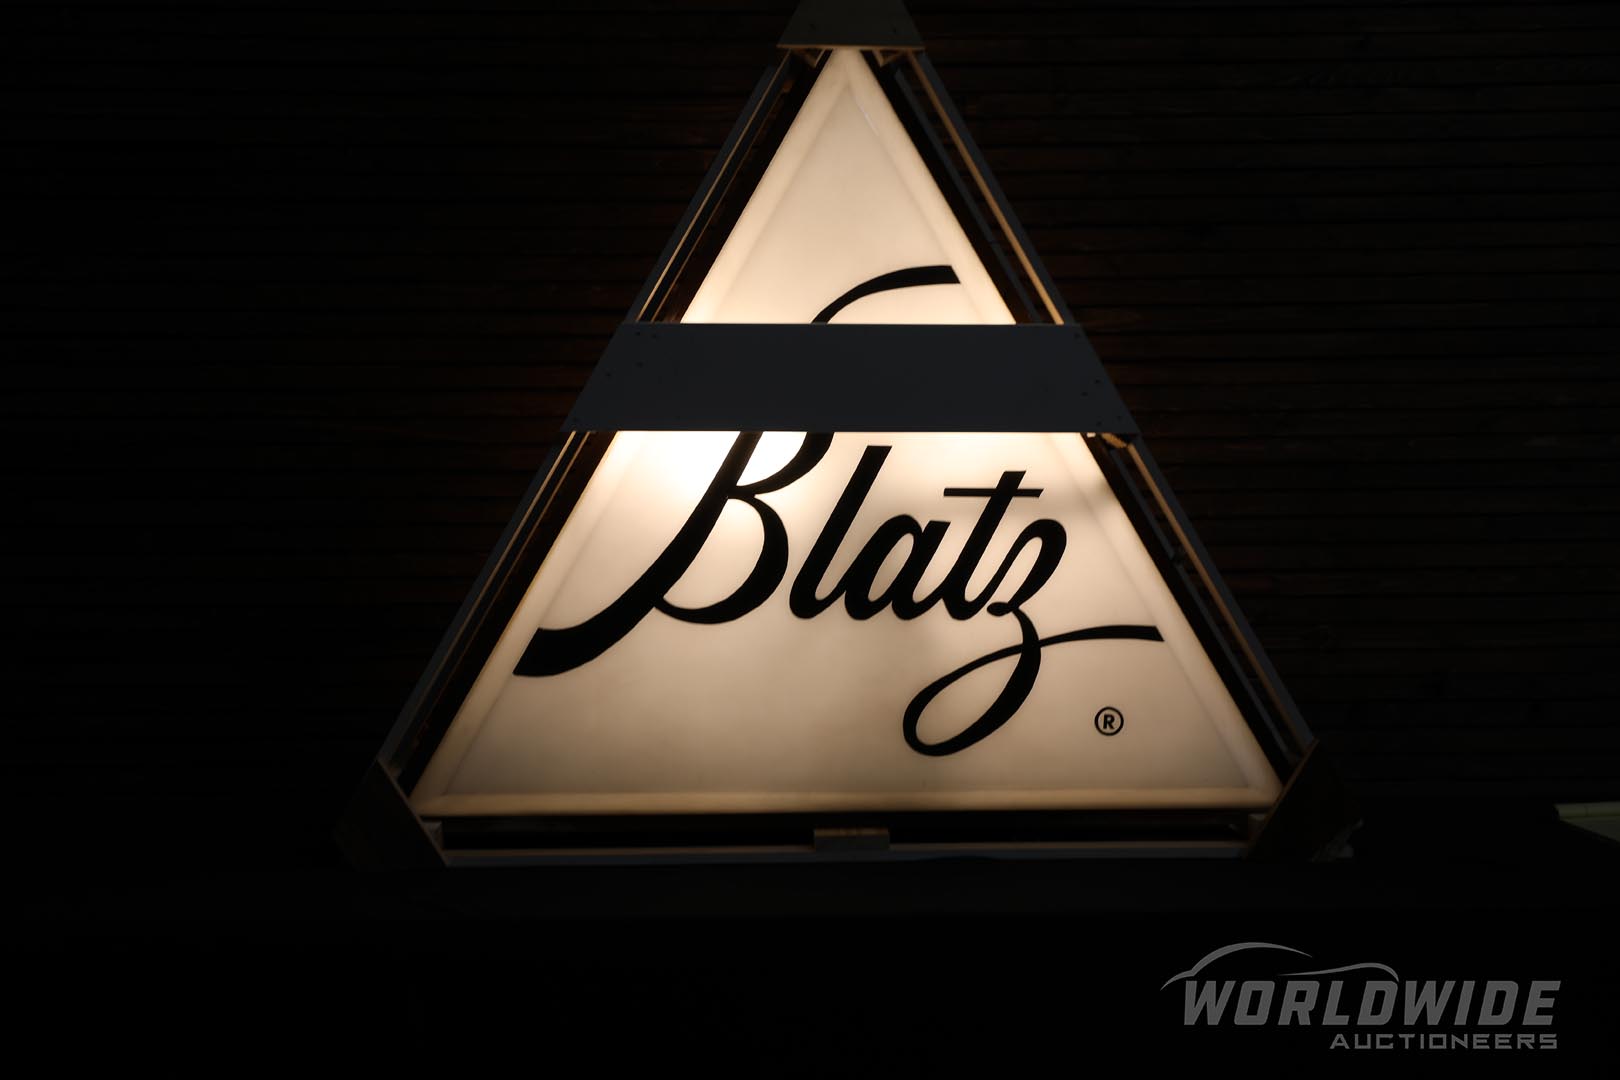 Blatz Double-Sided Lighted Sign